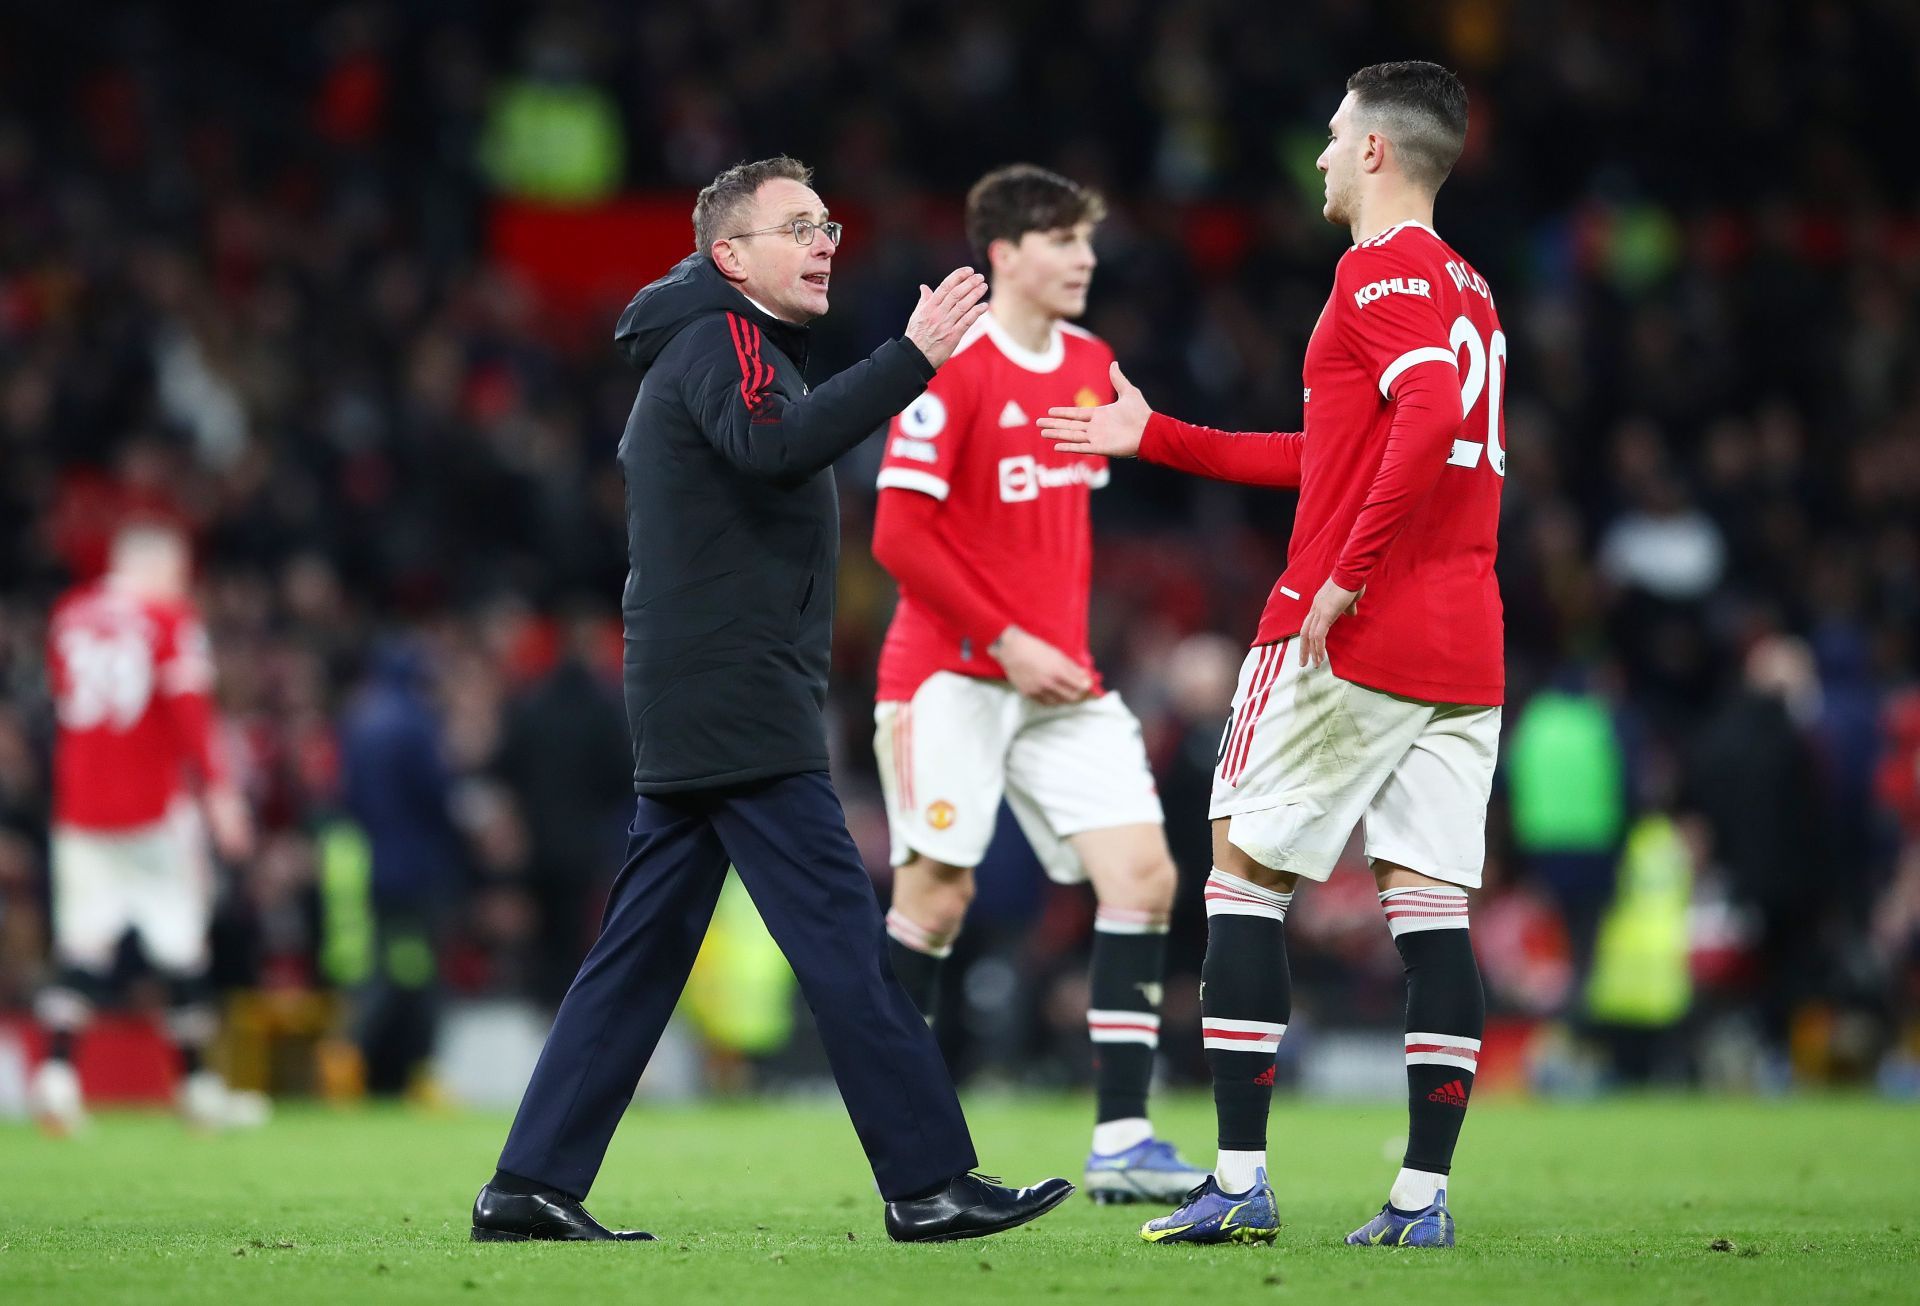 Ralf Ragnick has gotten his Manchester United tenure off to a perfect start.